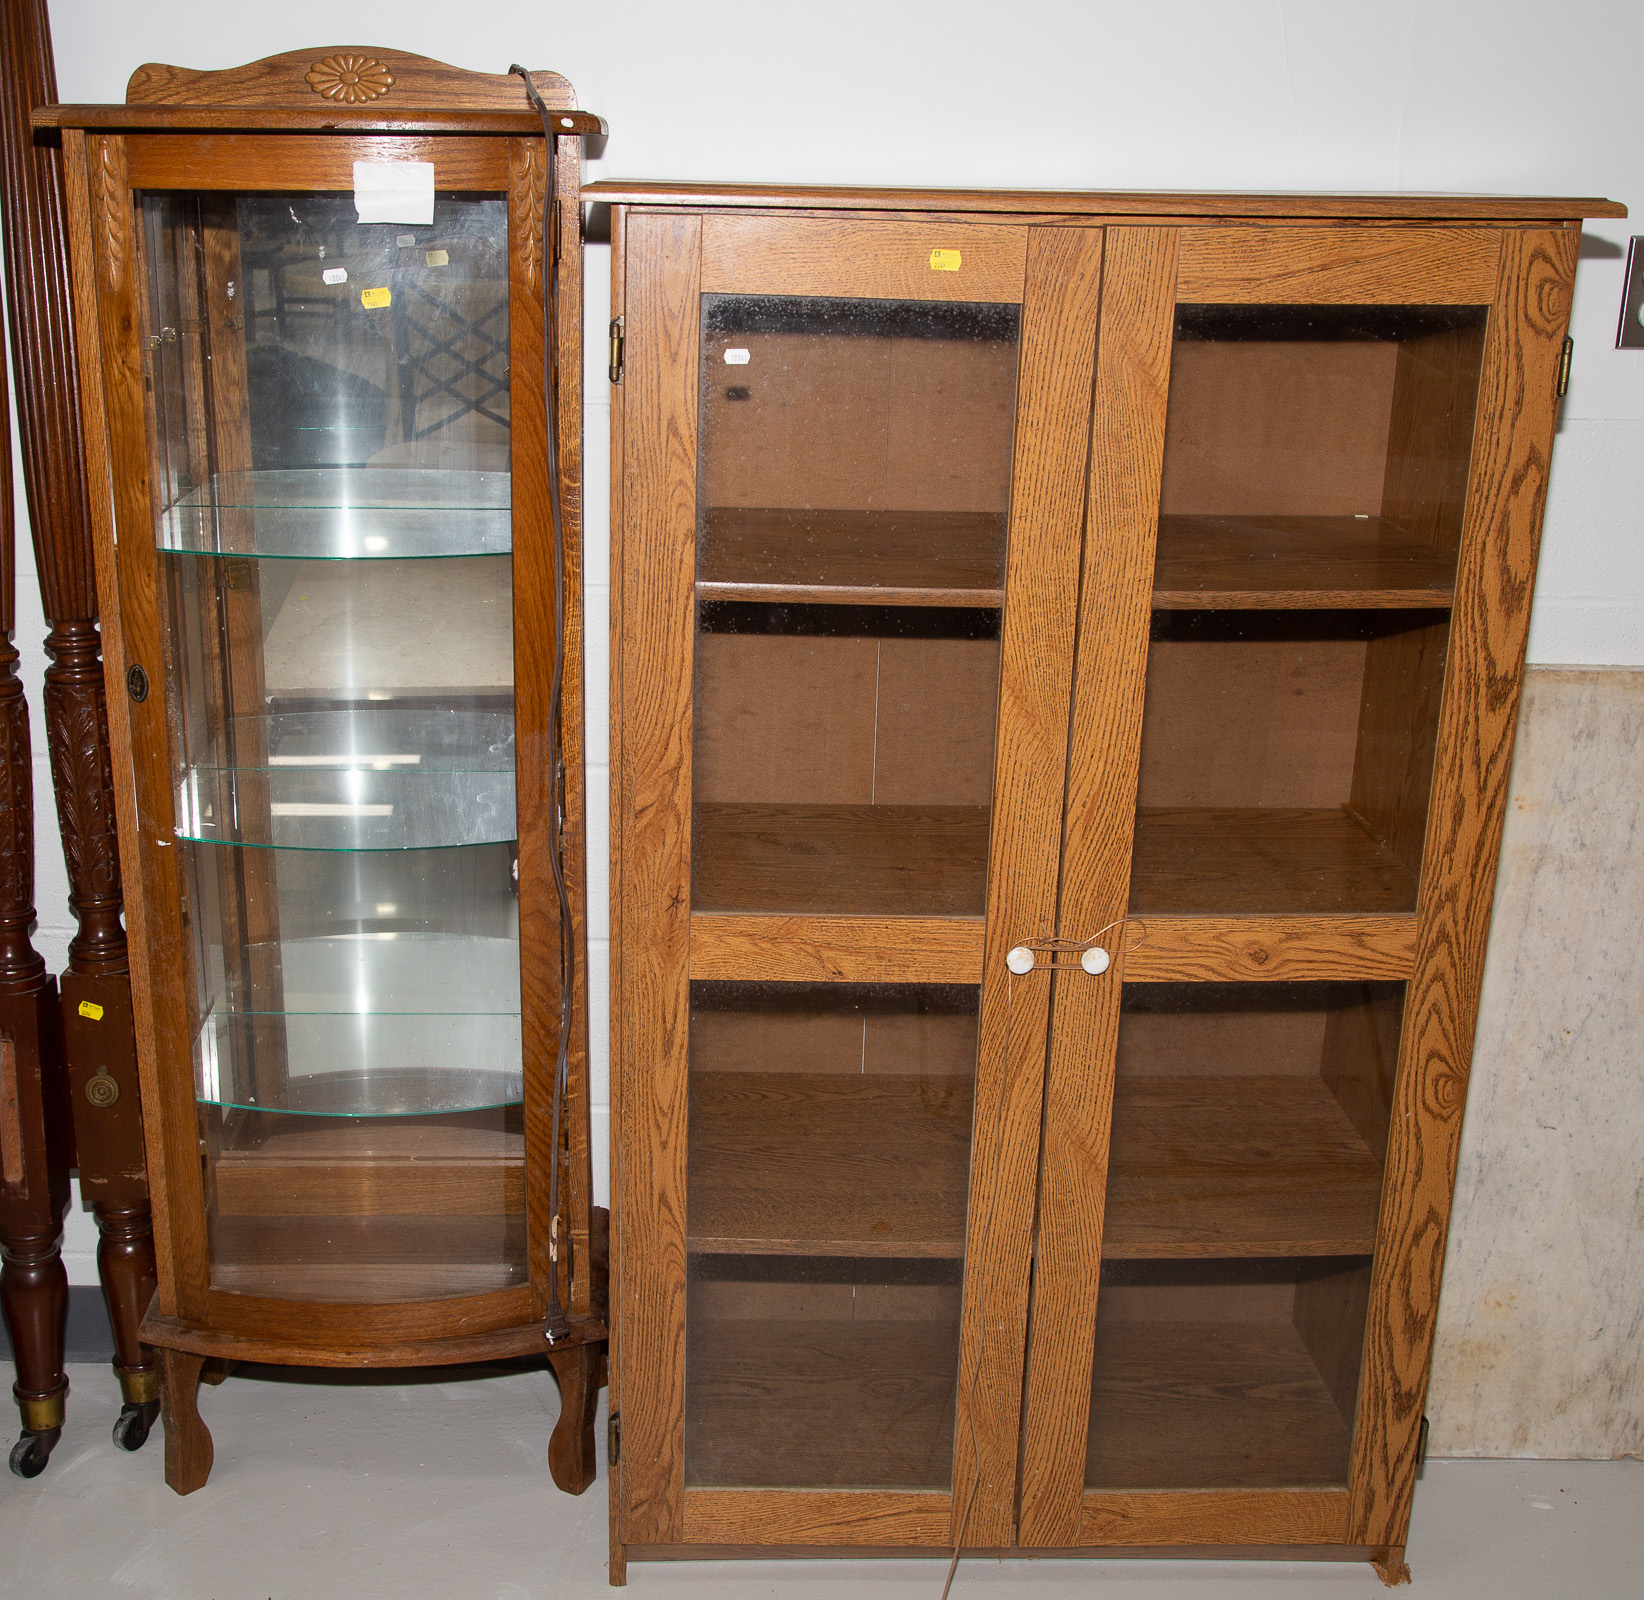 TWO STORAGE OR DISPLAY CABINETS 3351cc